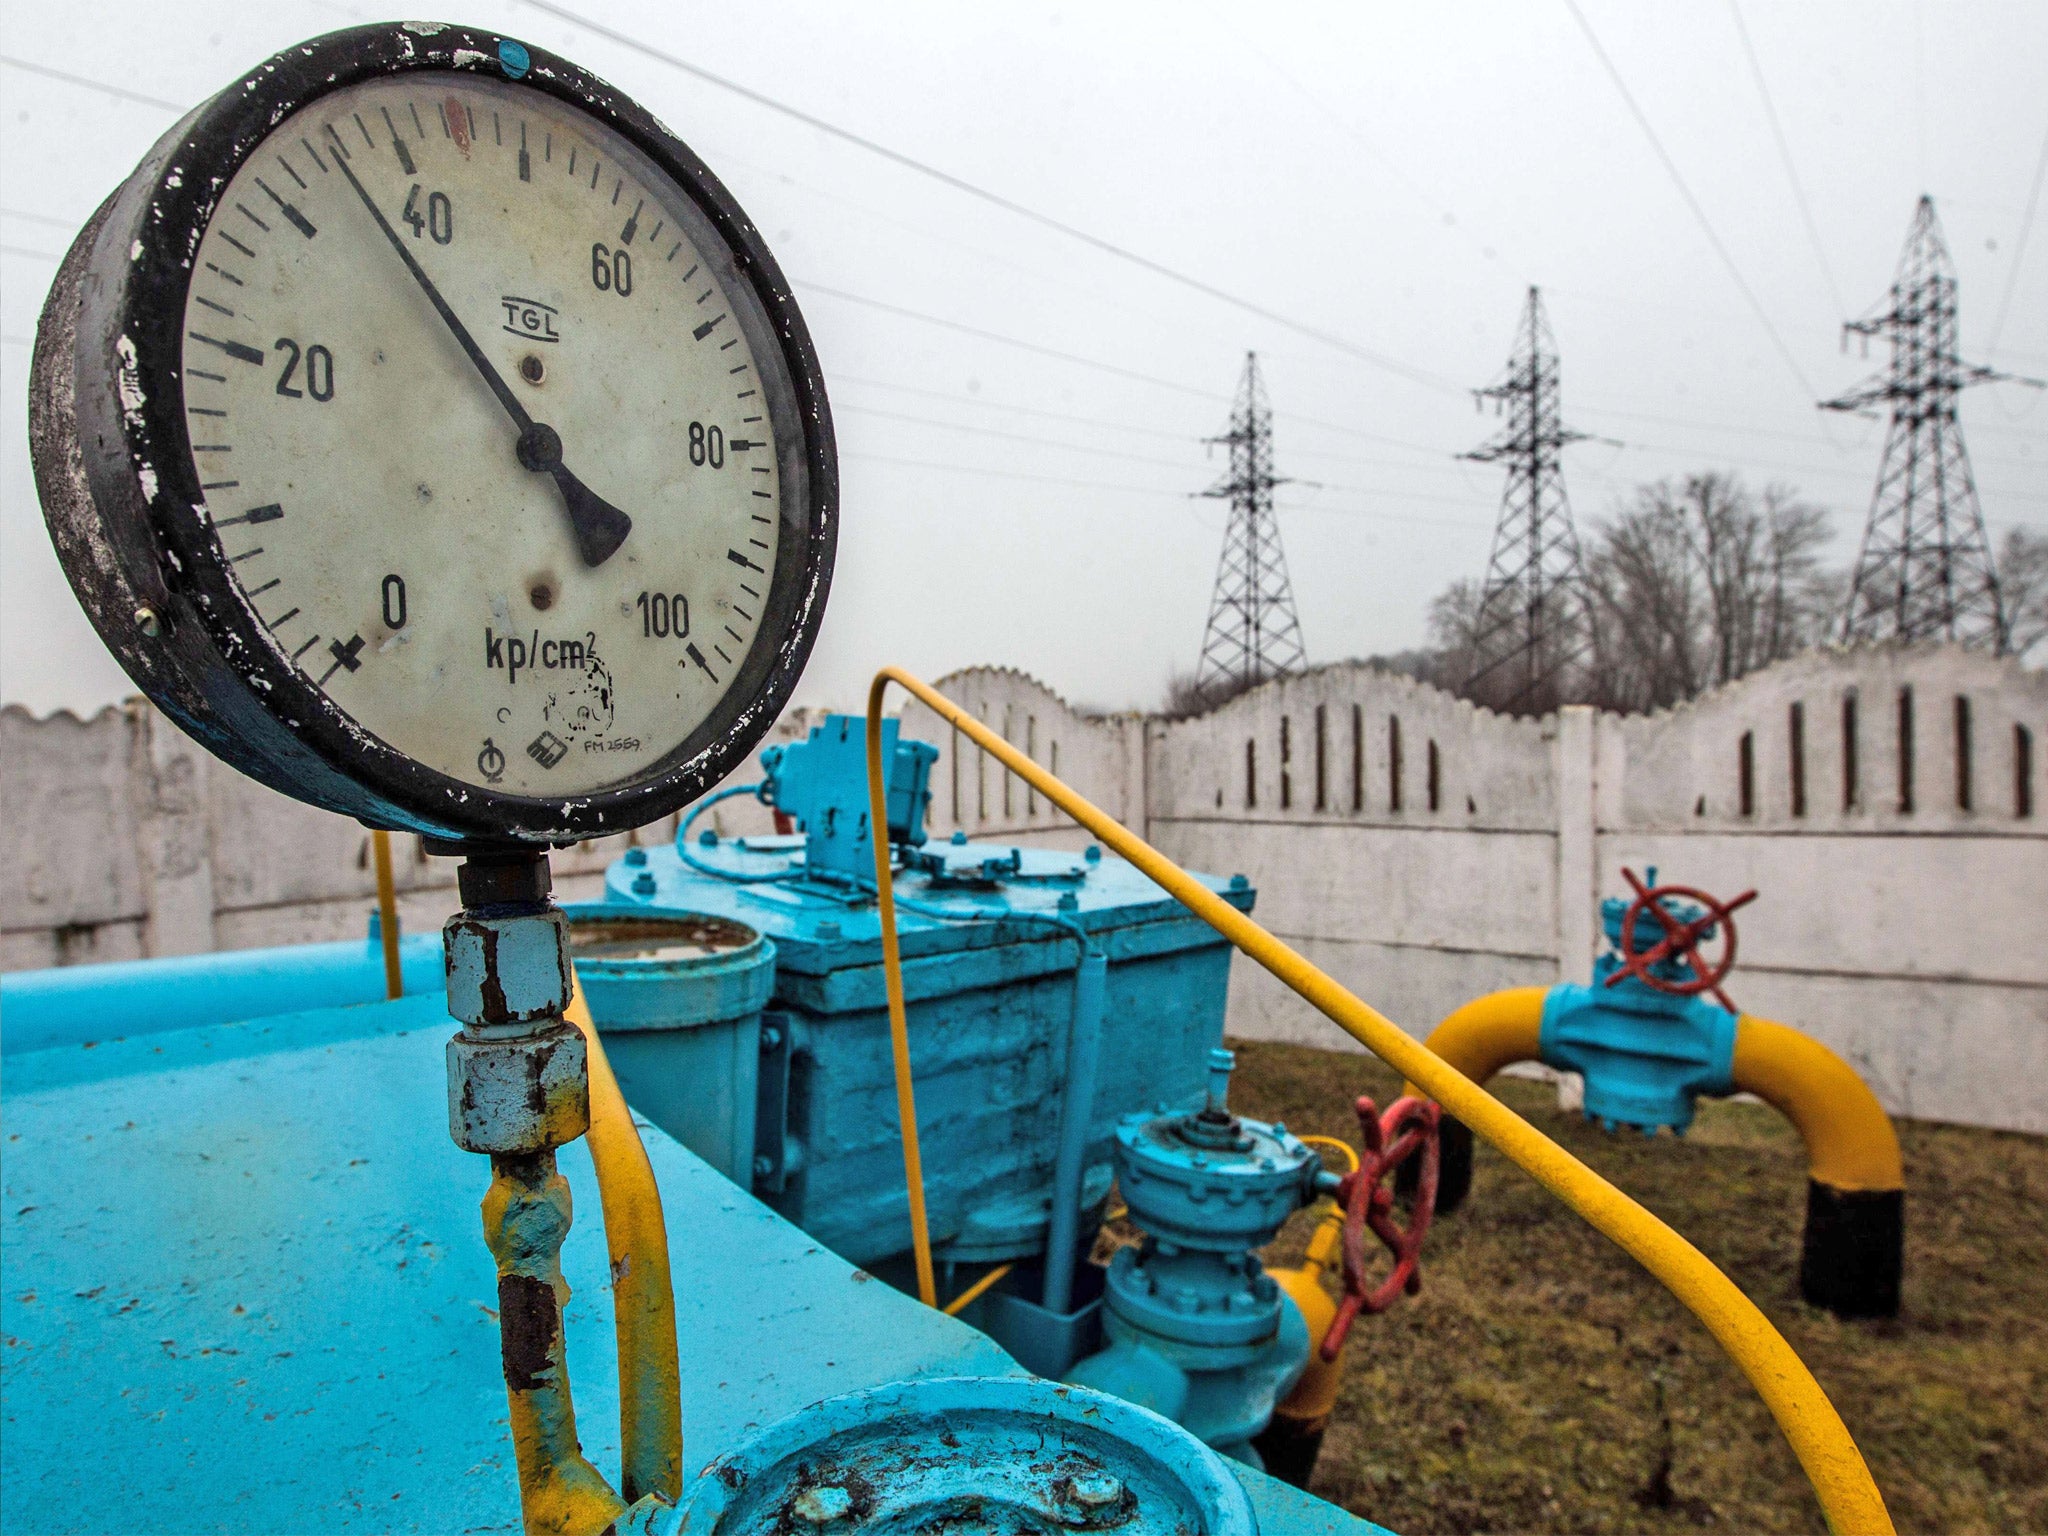 Ukrainian natural resources industries have been affected by the on-going civil war